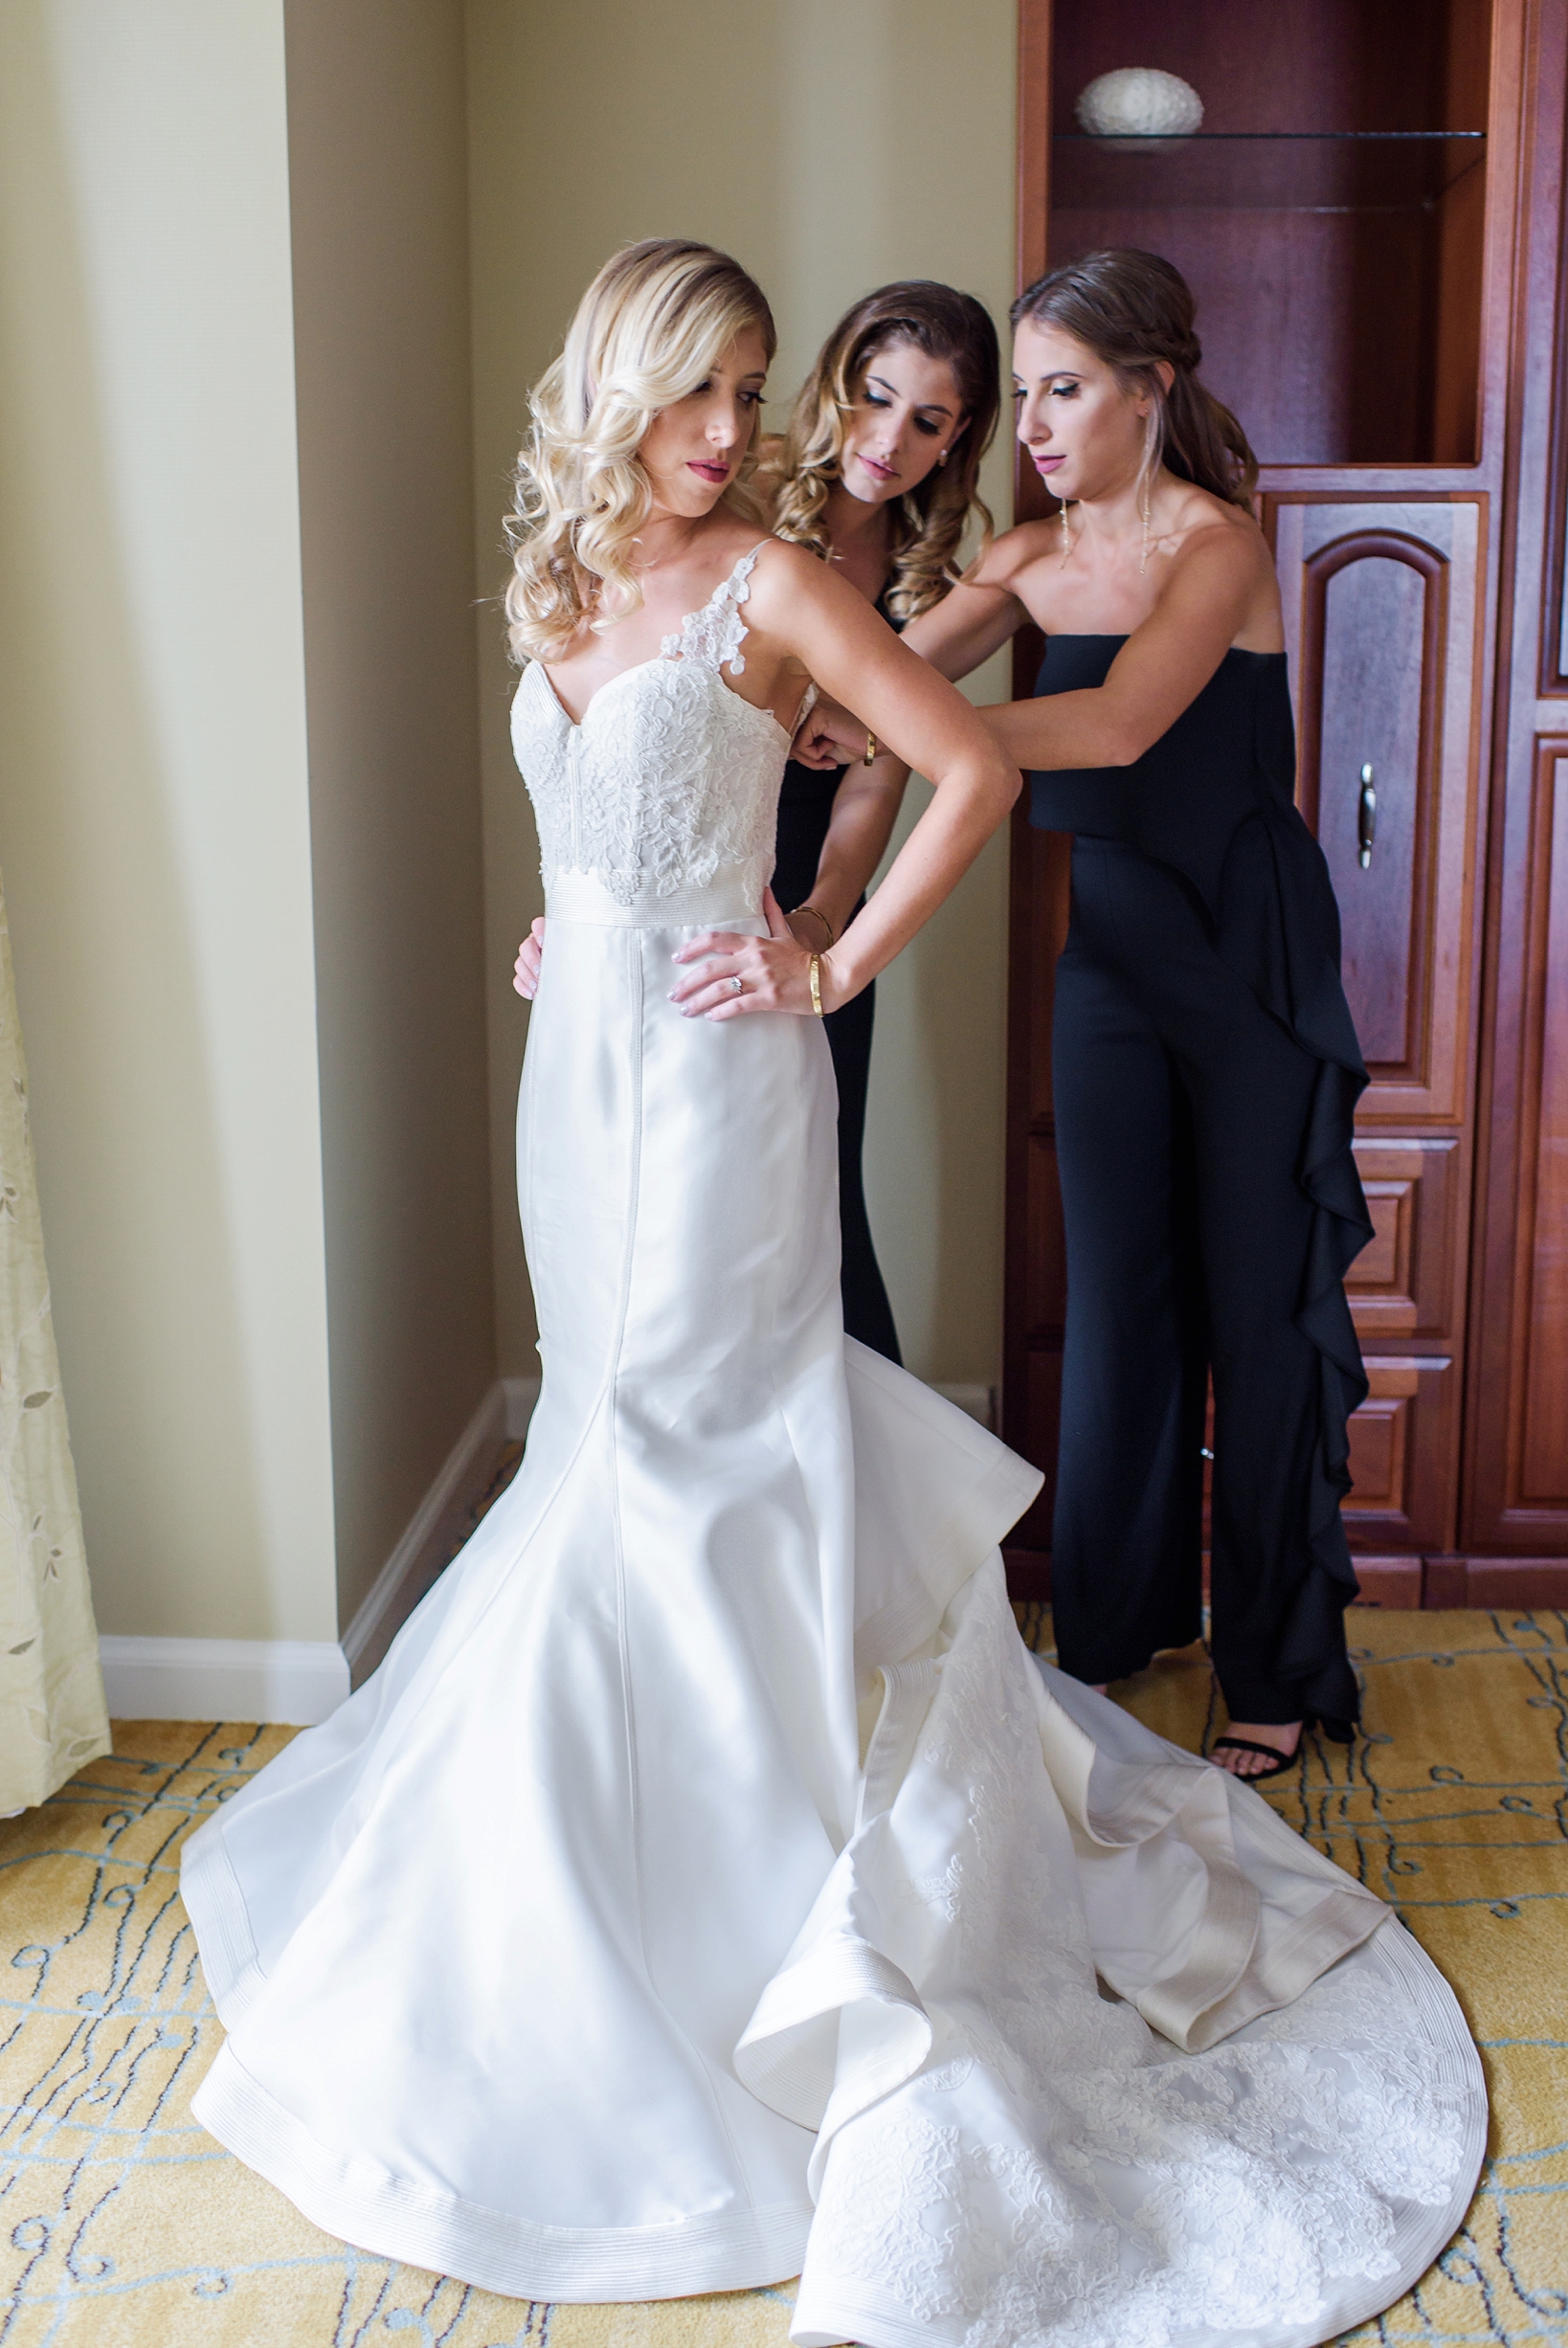 The bride's sisters help her into her wedding dress in Tampa, FL